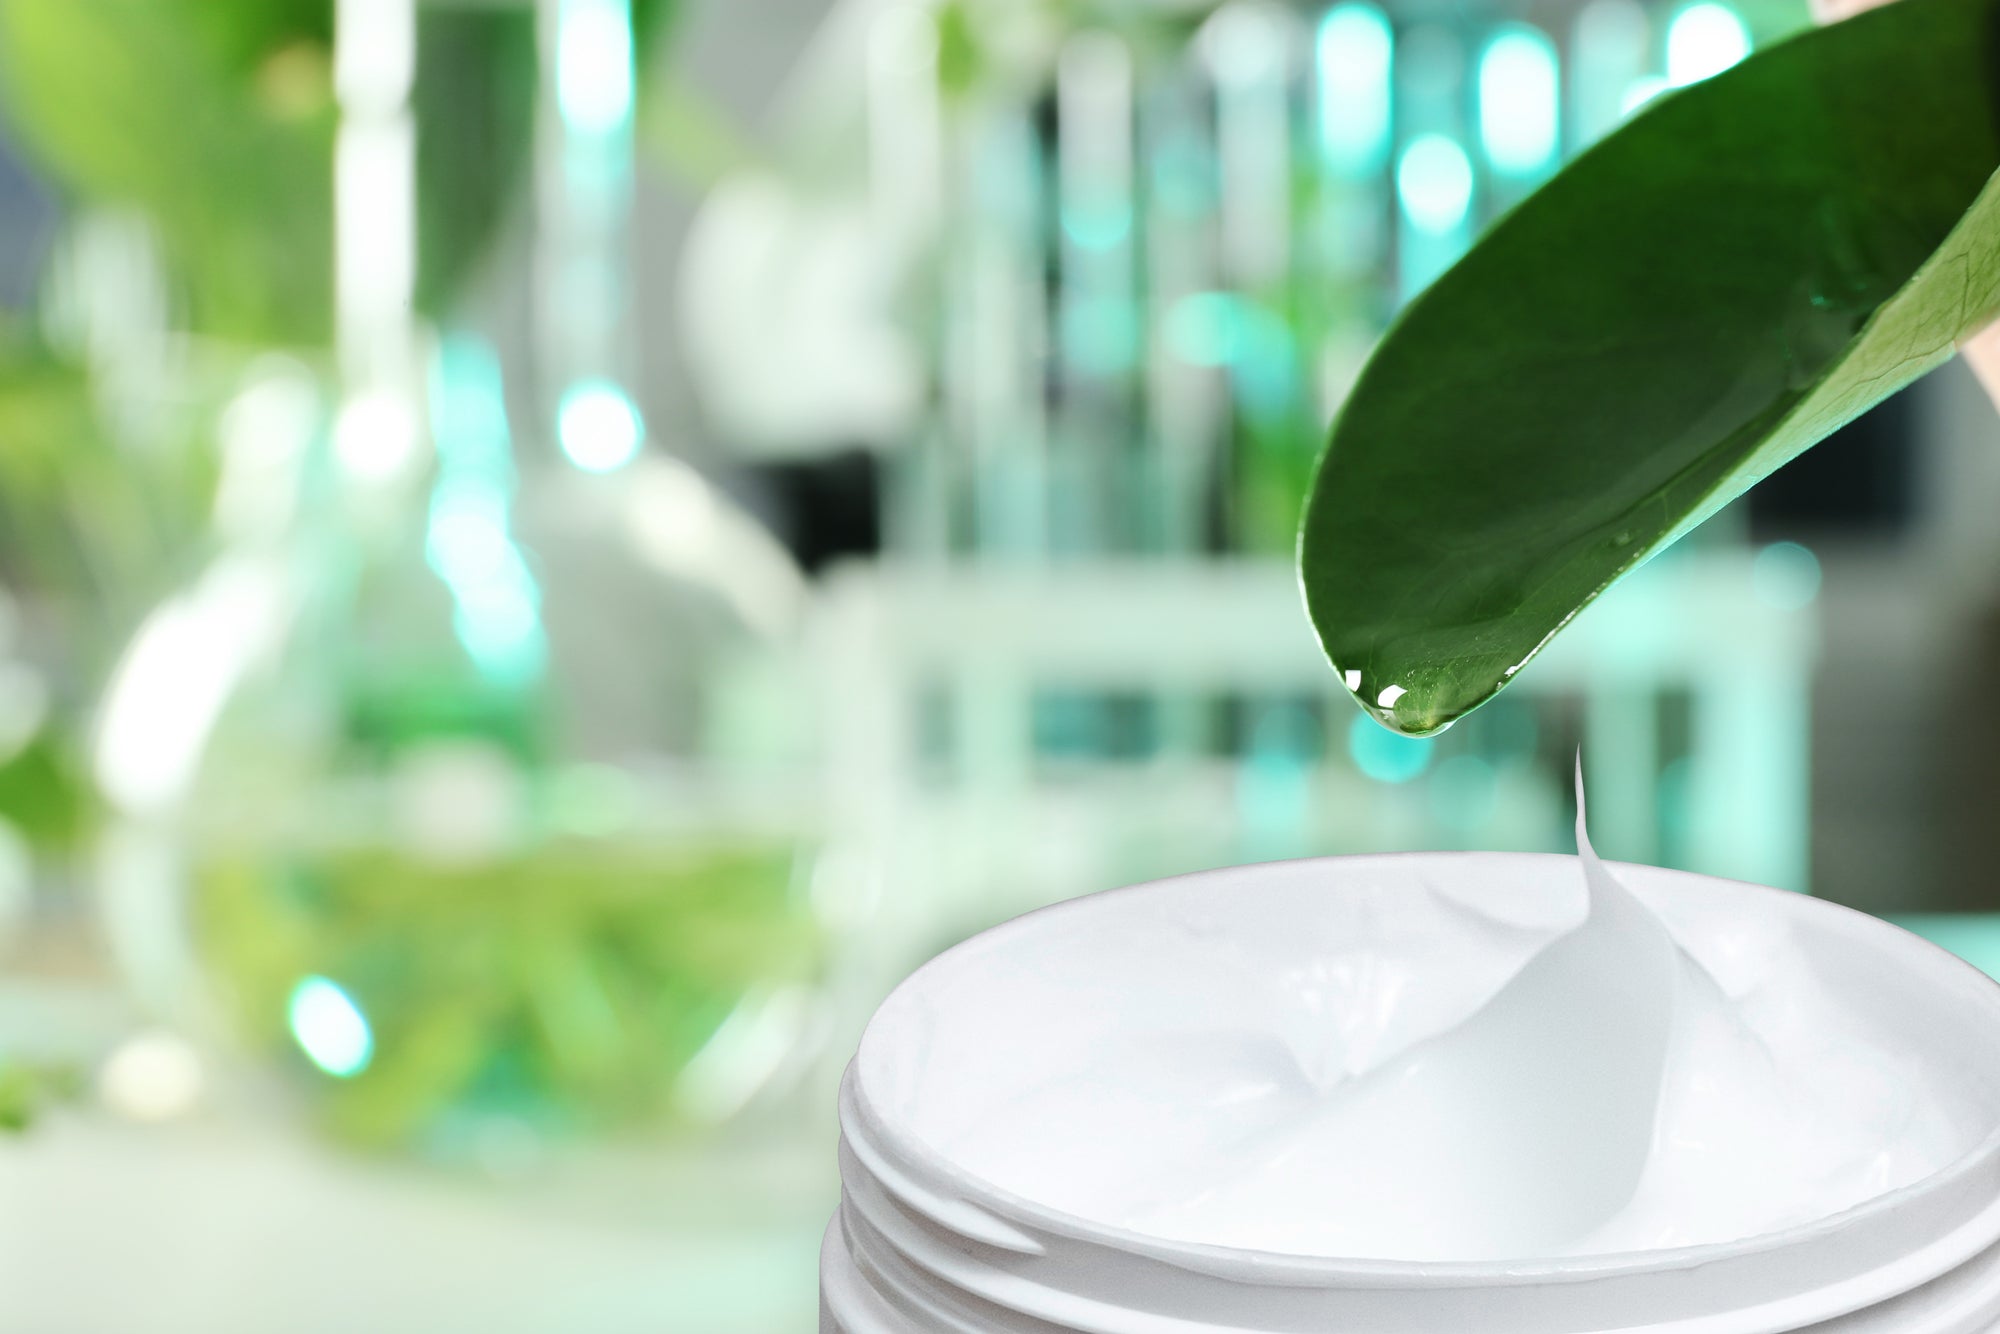 large leaf above jar of creamy hair product with leaves and science beakers in background